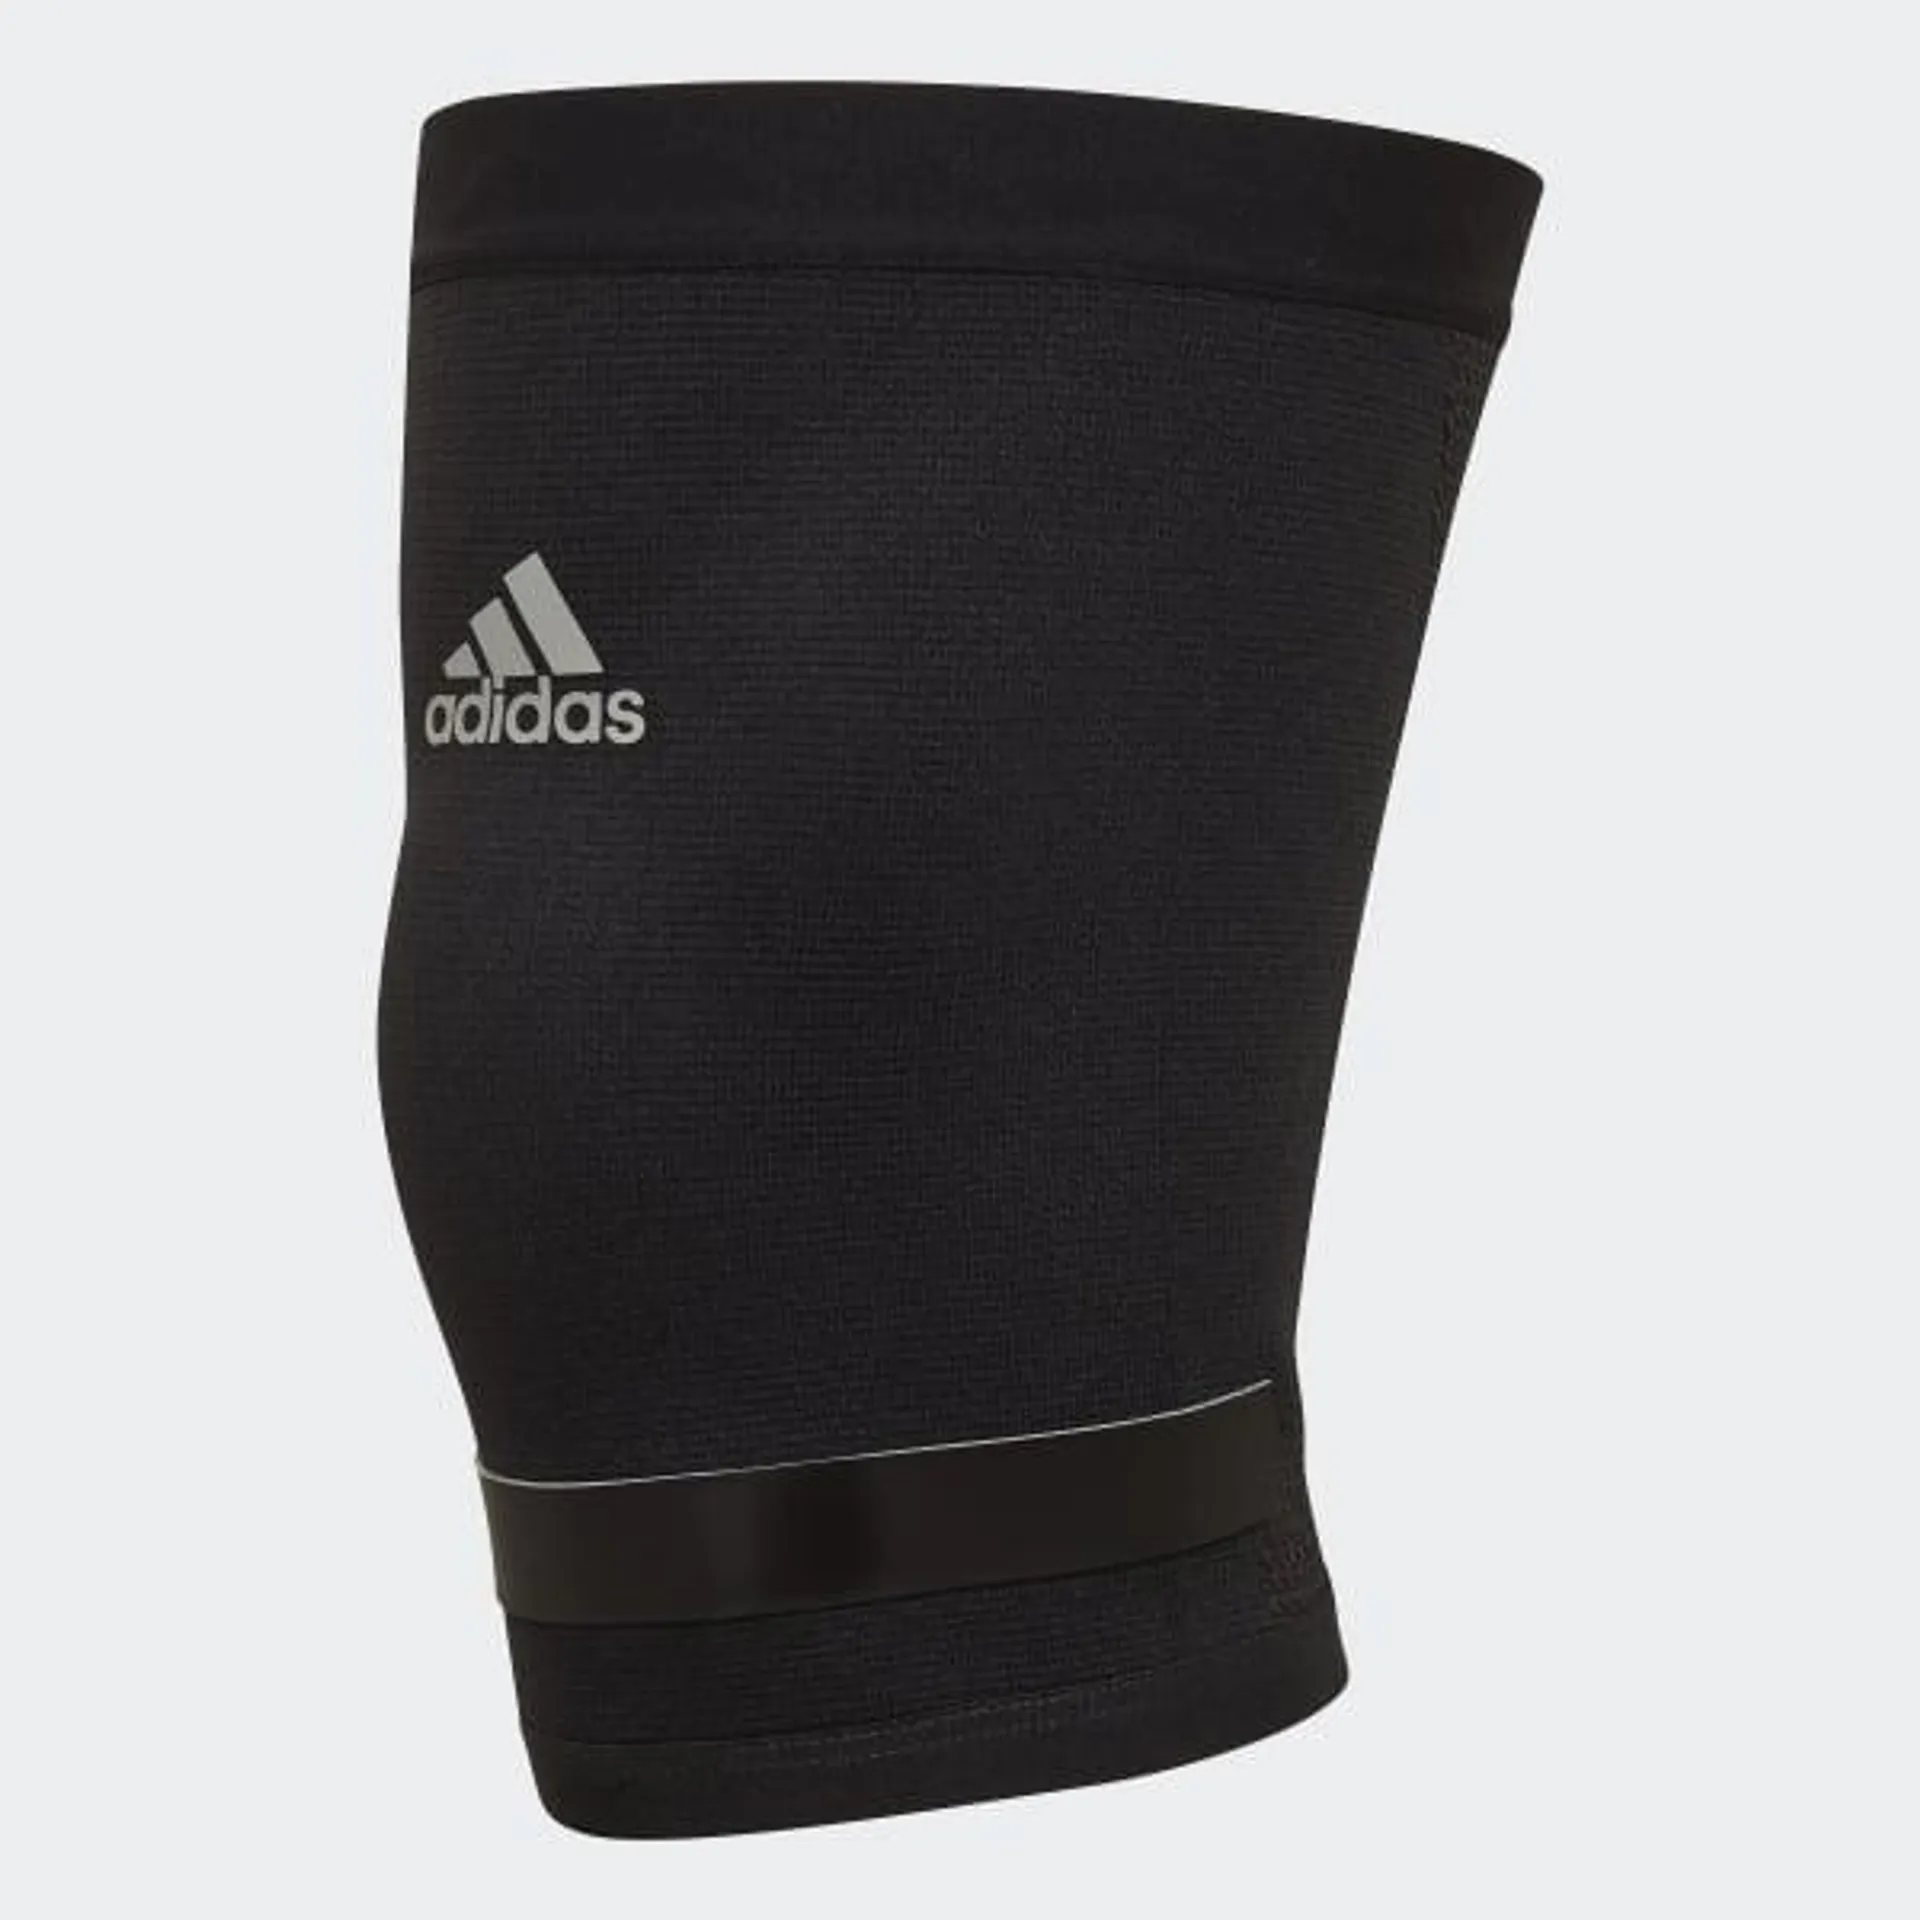 Performance Knee Support